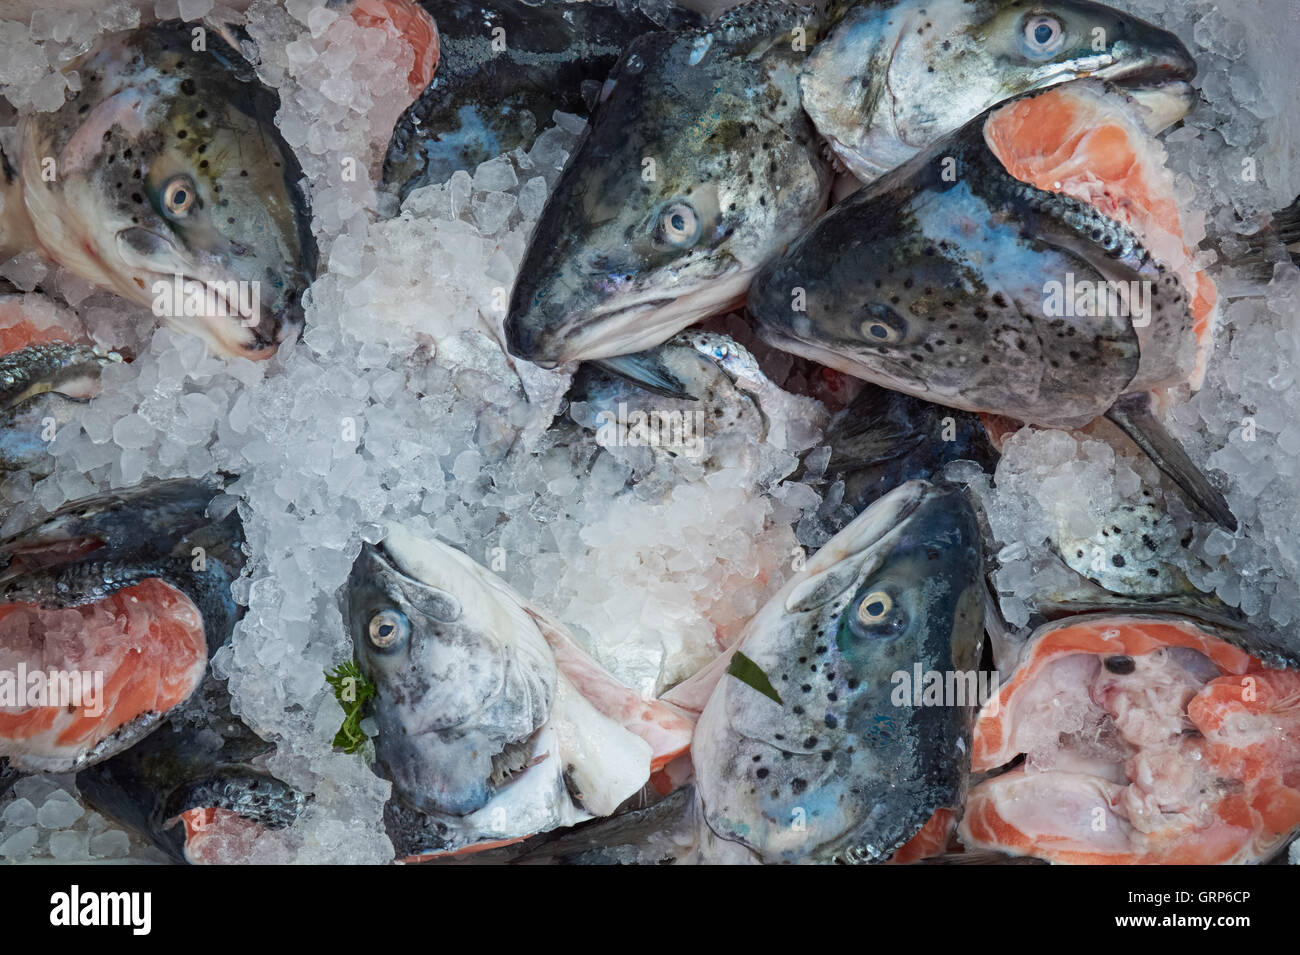 Salmon heads on ice at fishmonger's stall Stock Photo